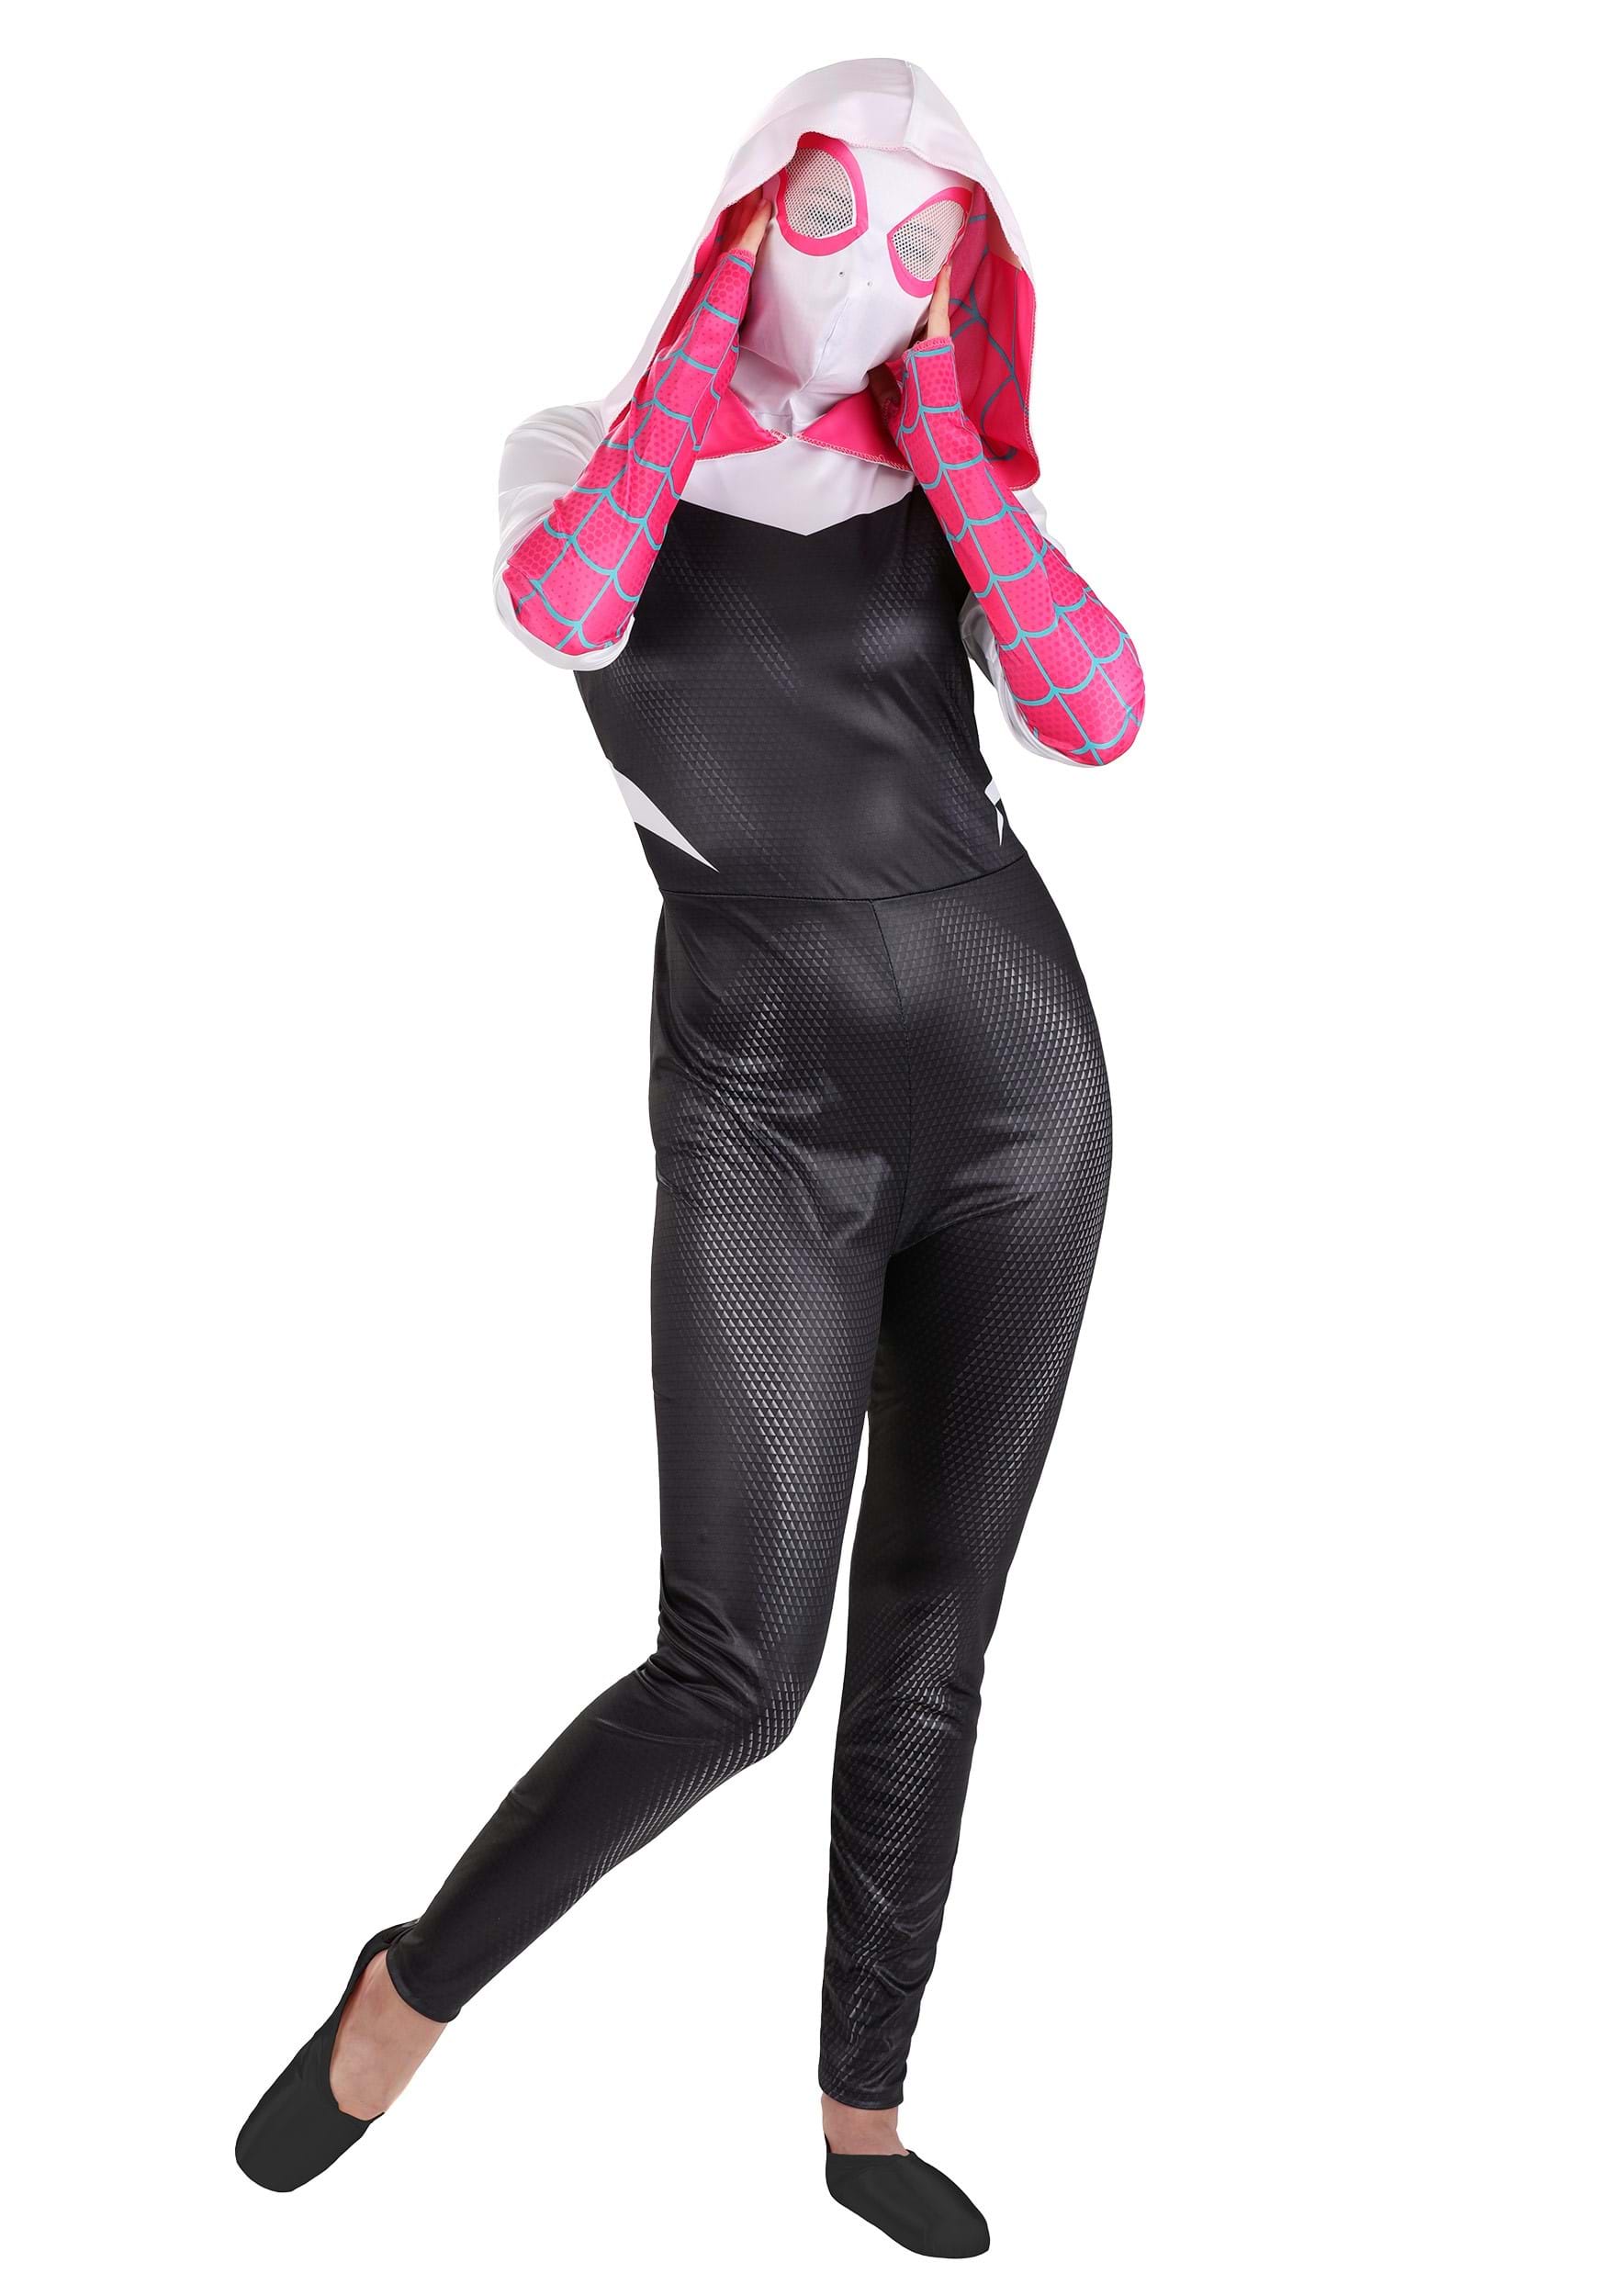 Spider-Gwen Costume for Adults